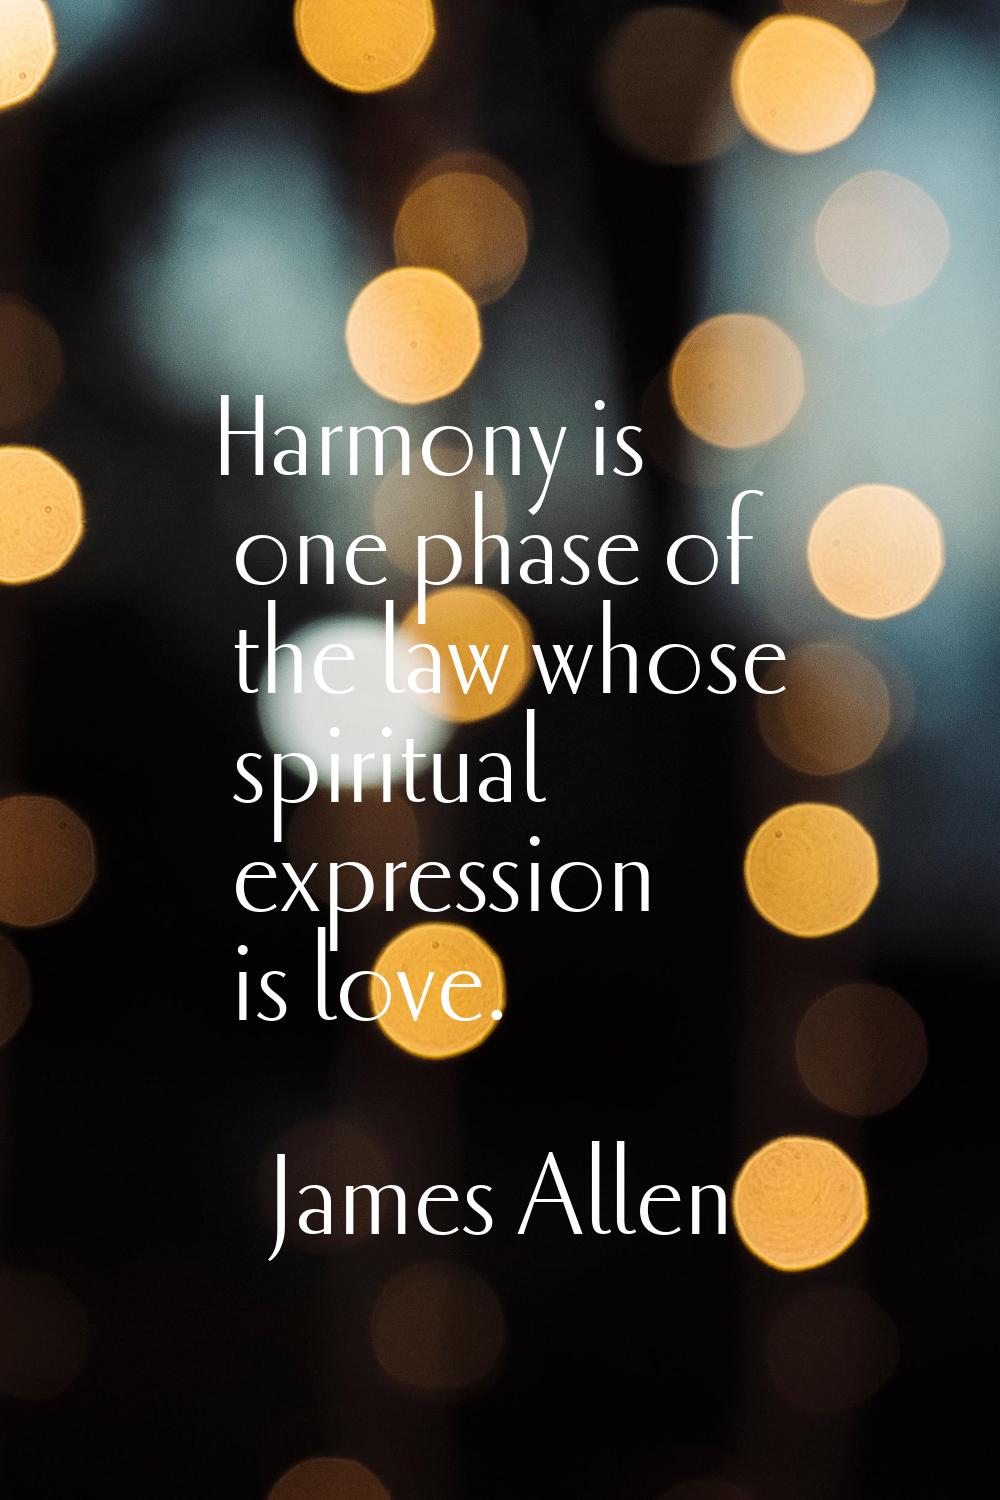 Harmony is one phase of the law whose spiritual expression is love.